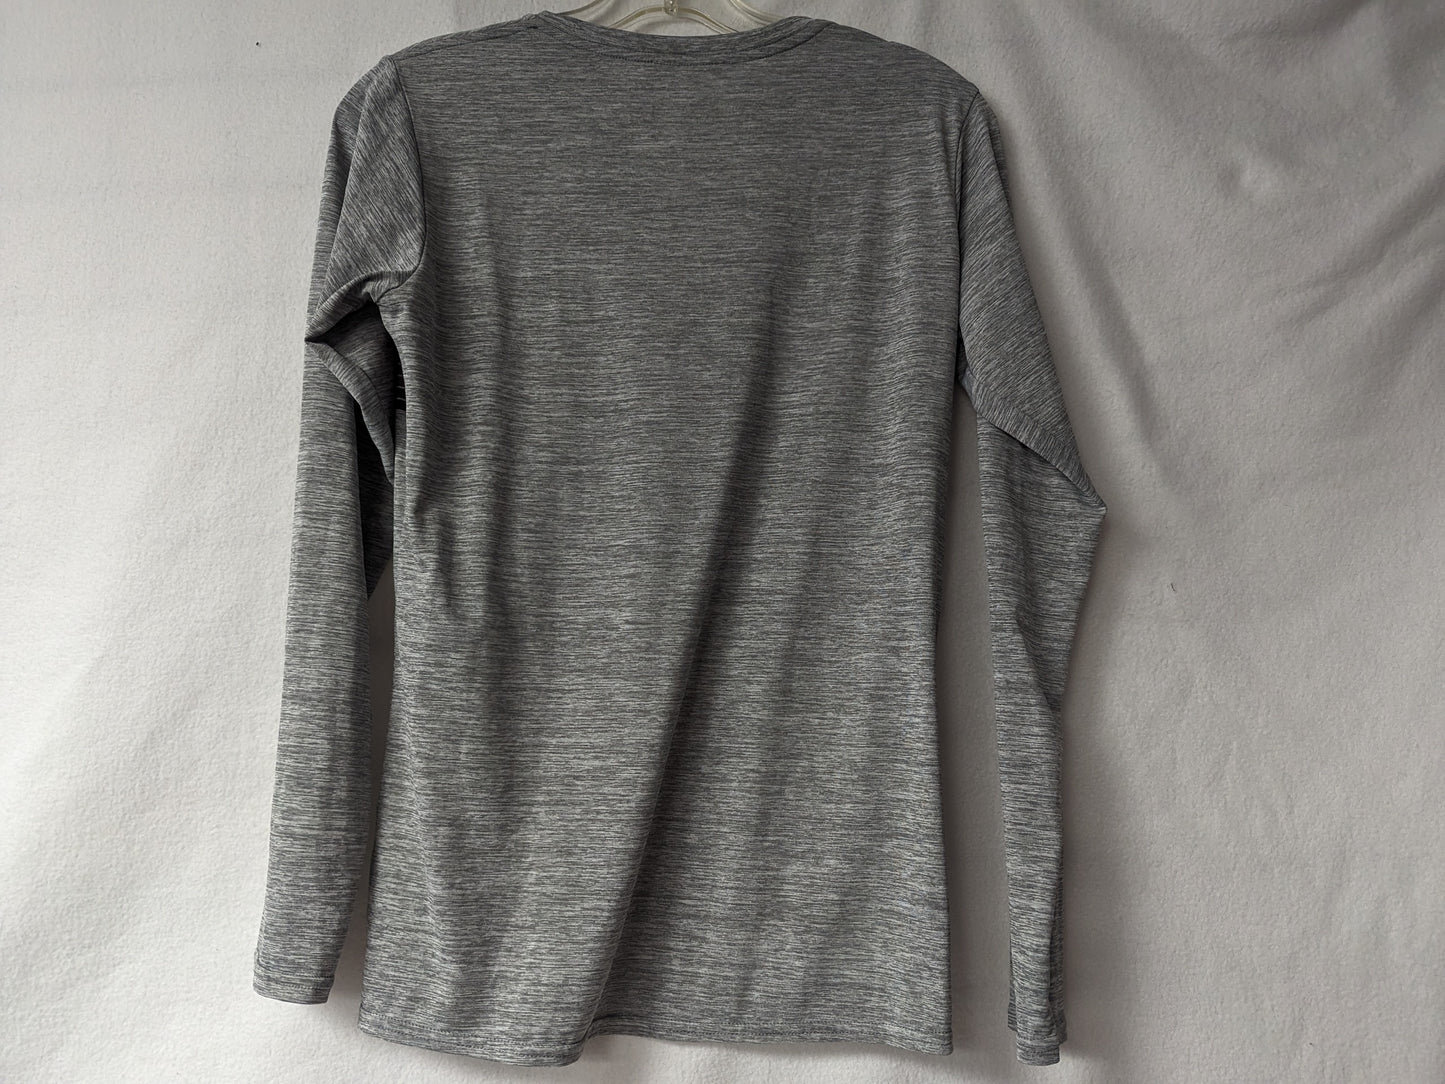 Patagonia Long Sleeve Pull Over Shirt Size Small Color Gray Condition Used